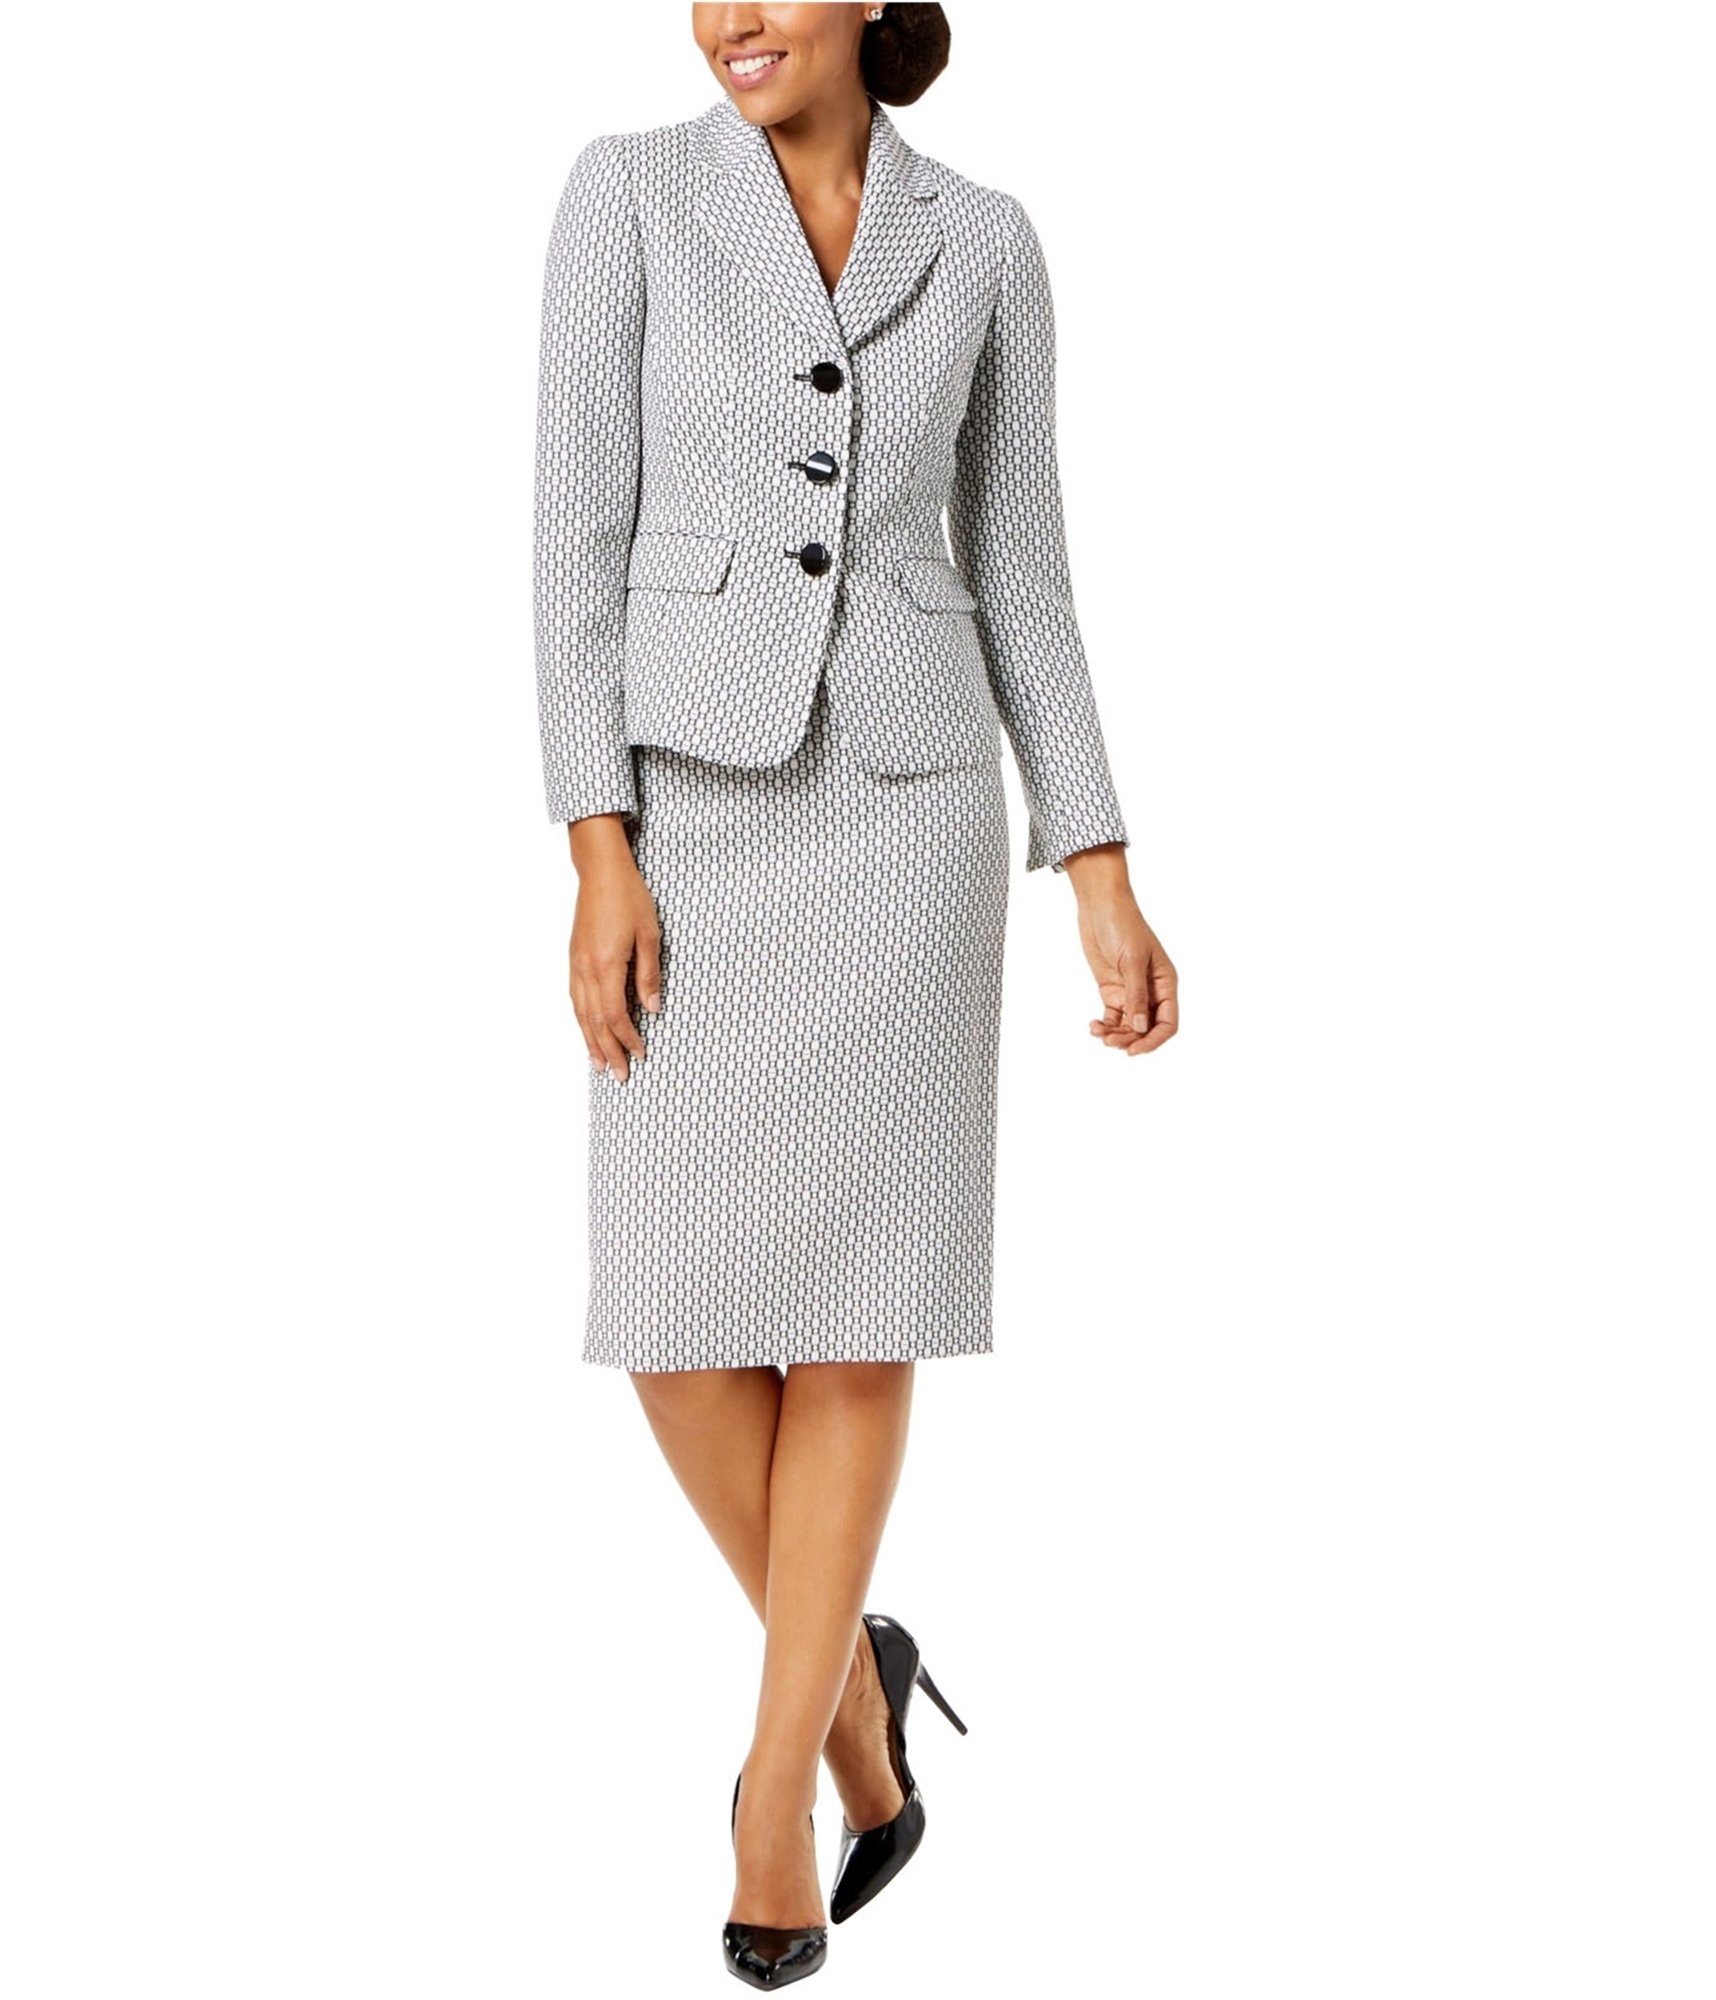 TKFDC Professional Long Tweed Suit Jacket Women's Autumn and Winter  Thickening Work Clothes (Color : A, Size : X-Large)